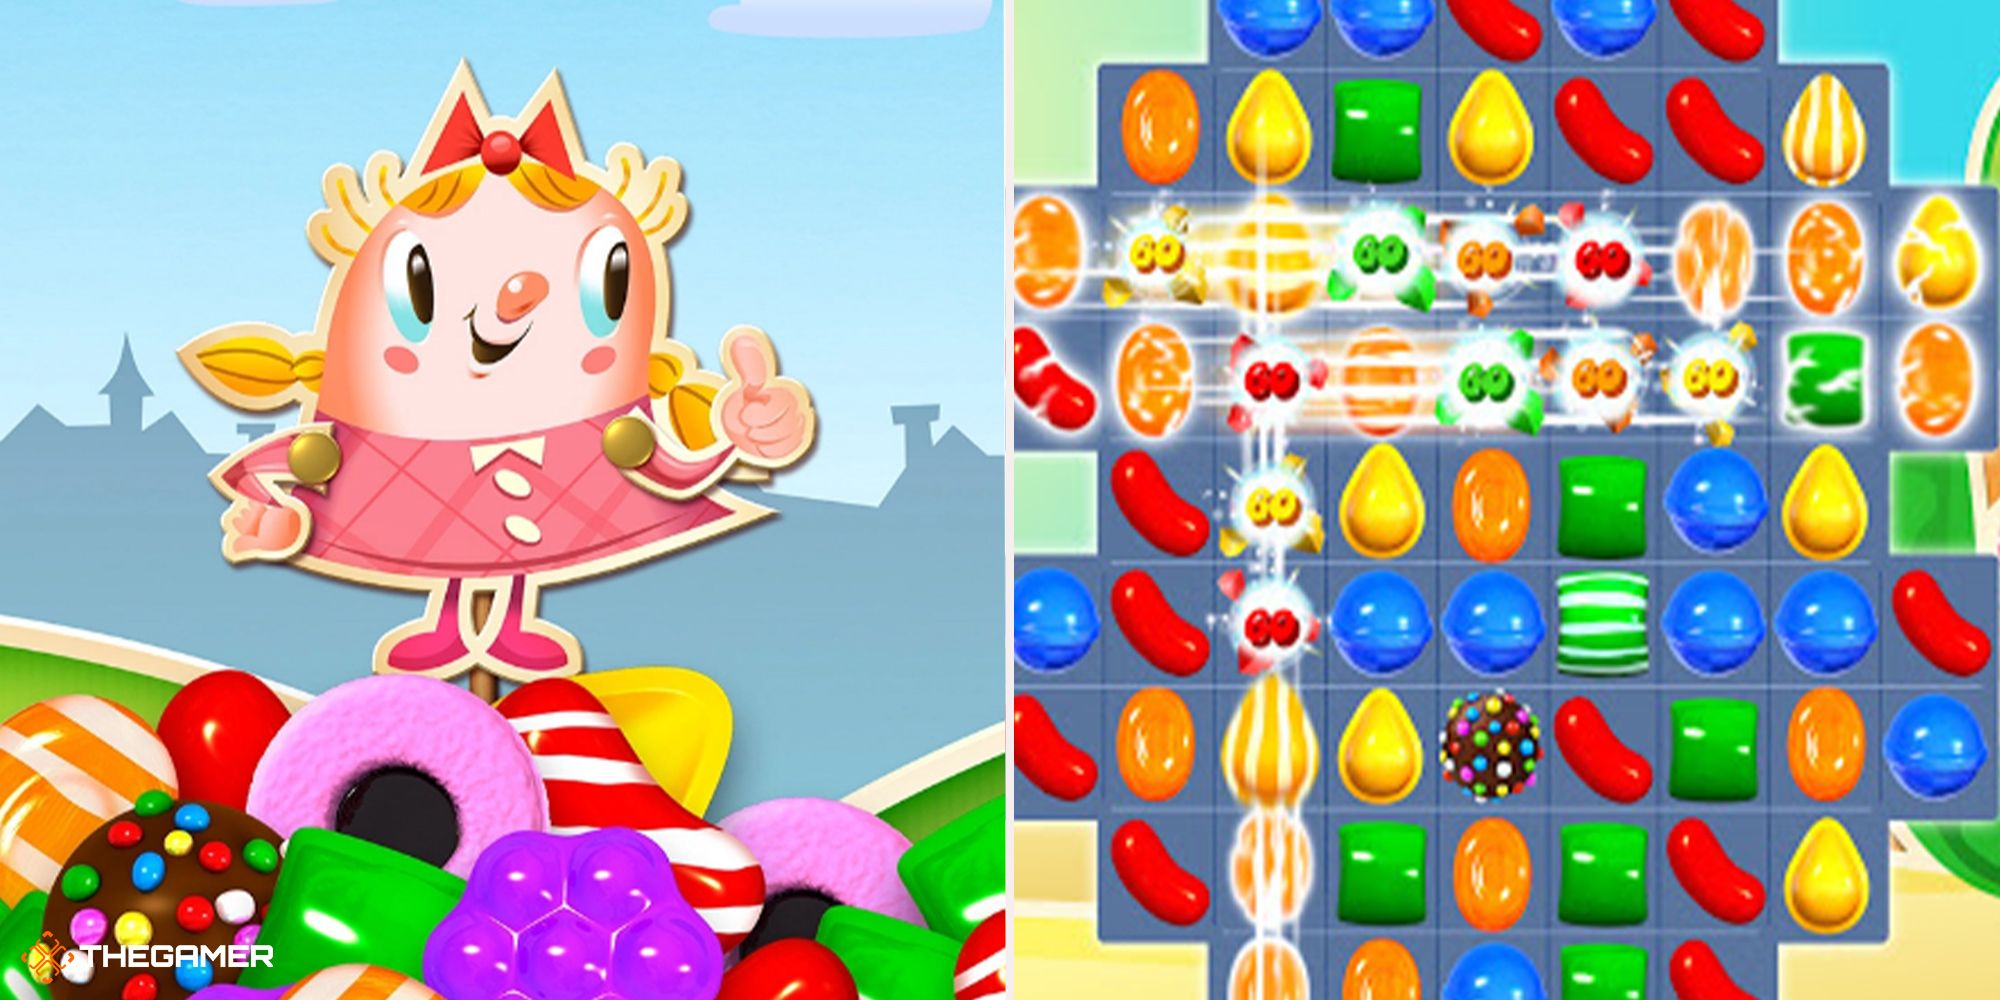 Candy Crush - mascot on left, game board on right